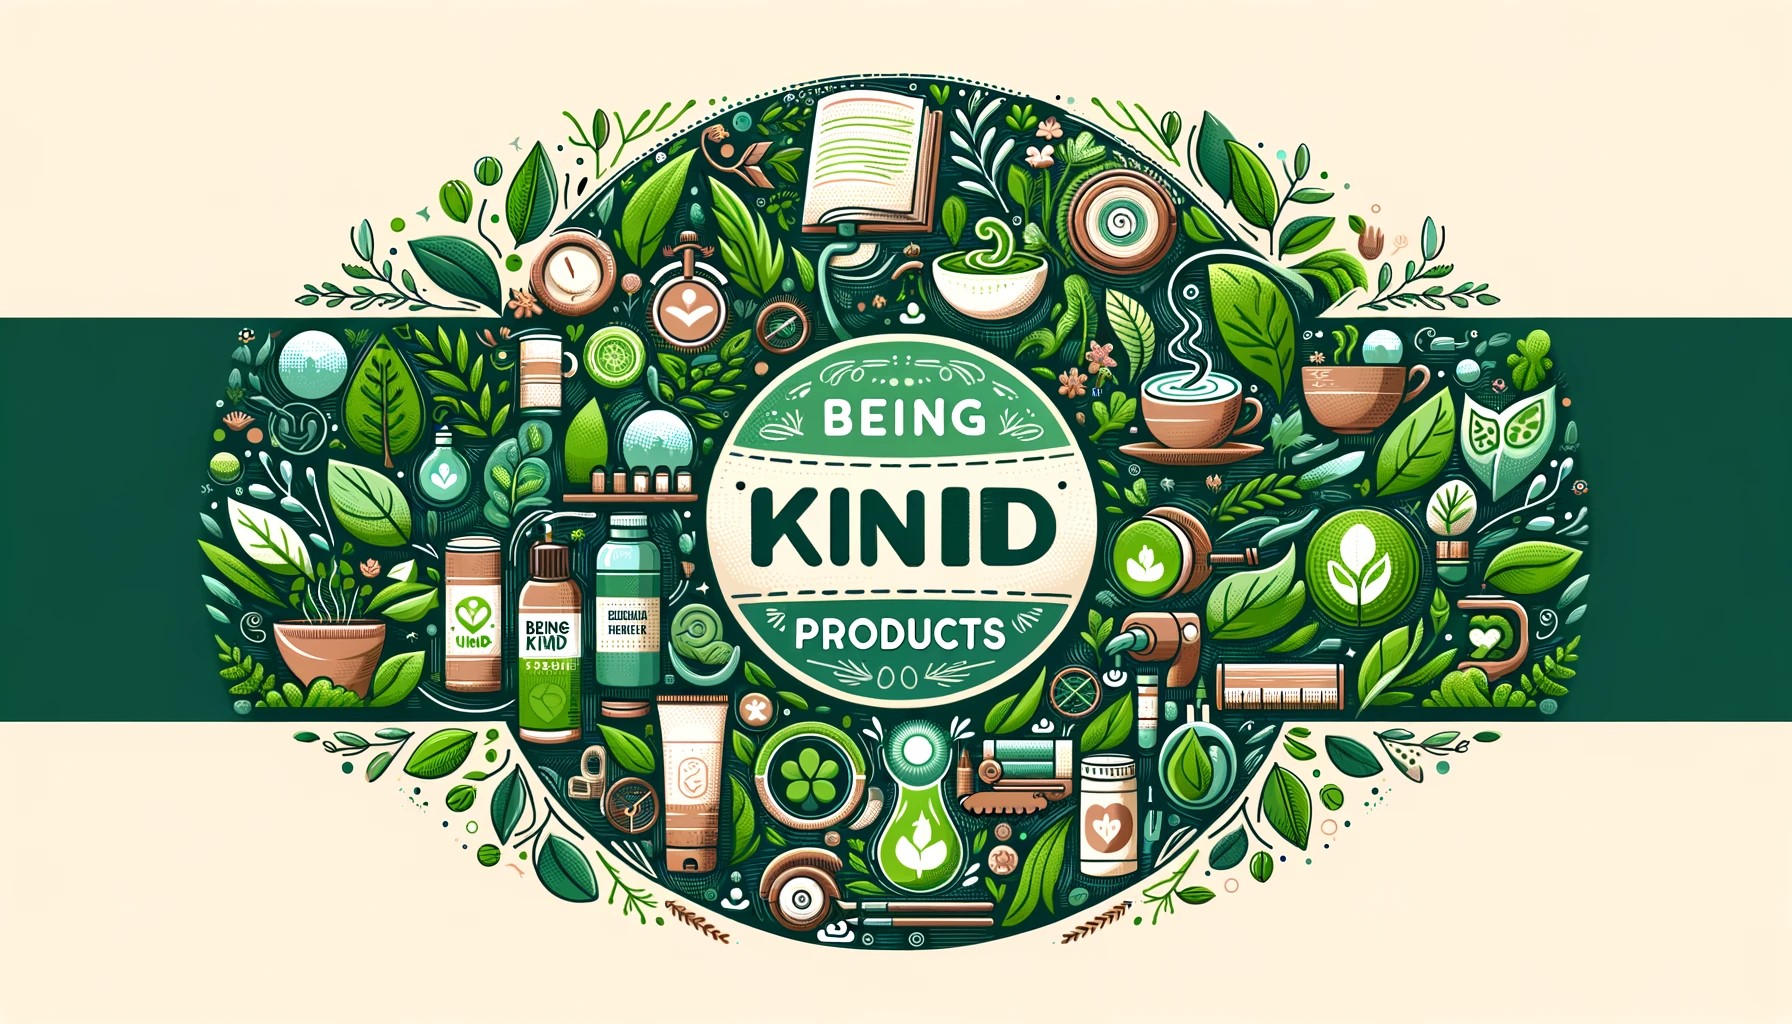 being kind products image